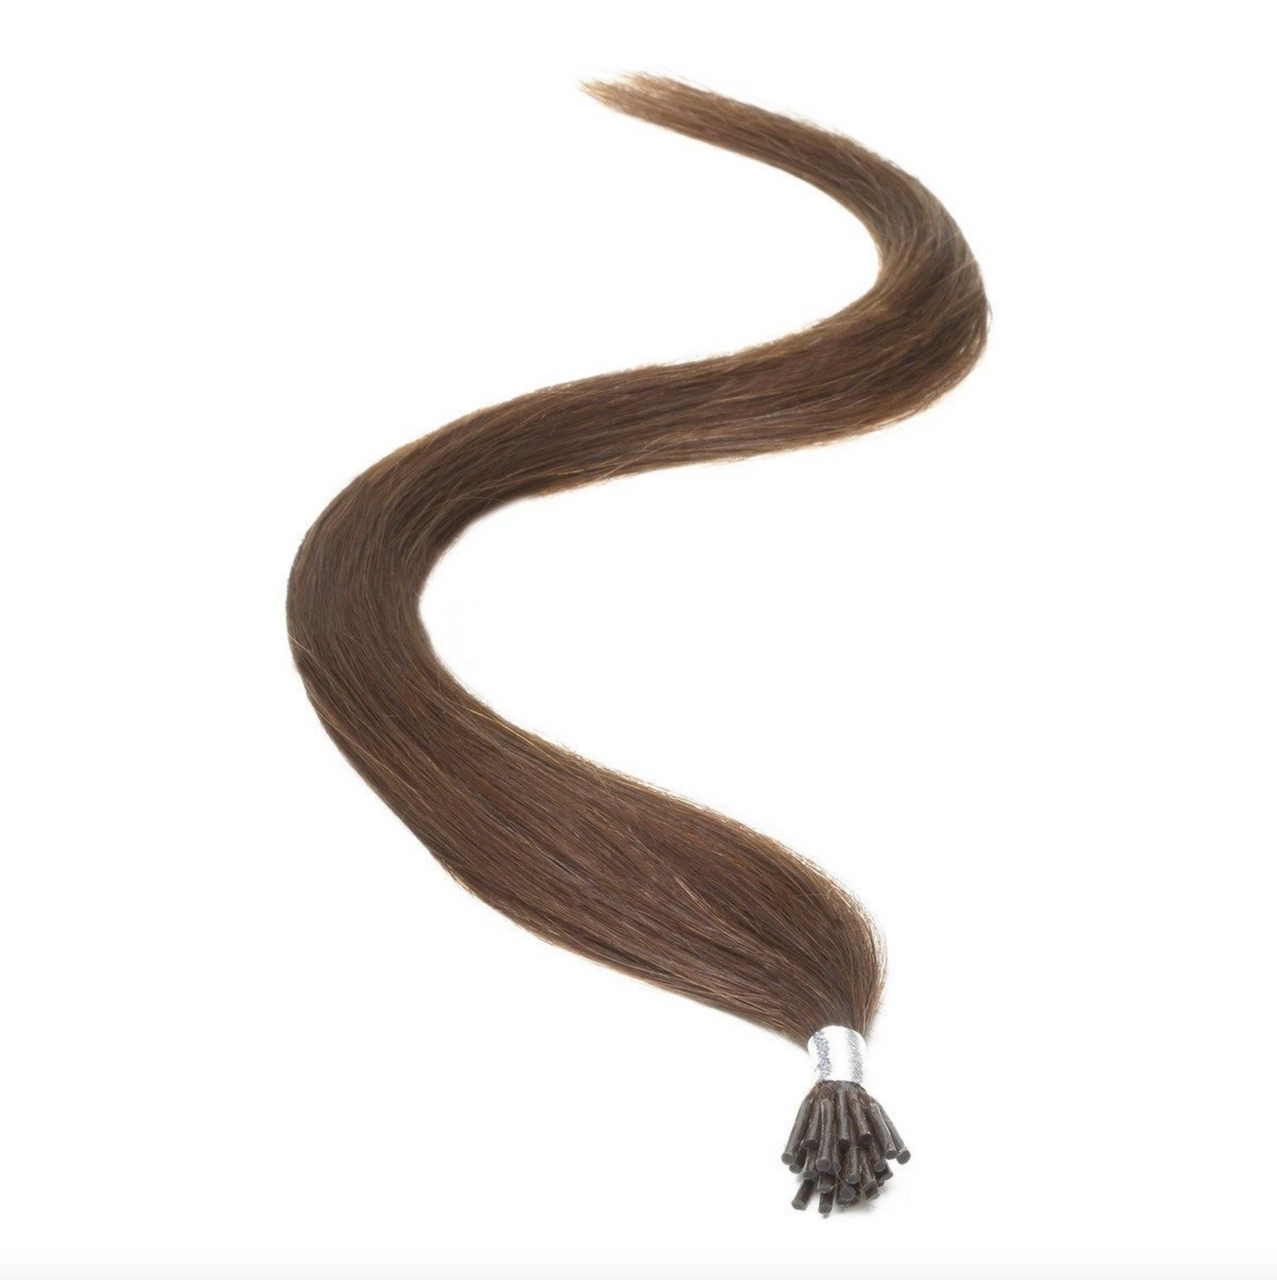 50 Piece iTip Remi Human Hair Extensions - 50g 